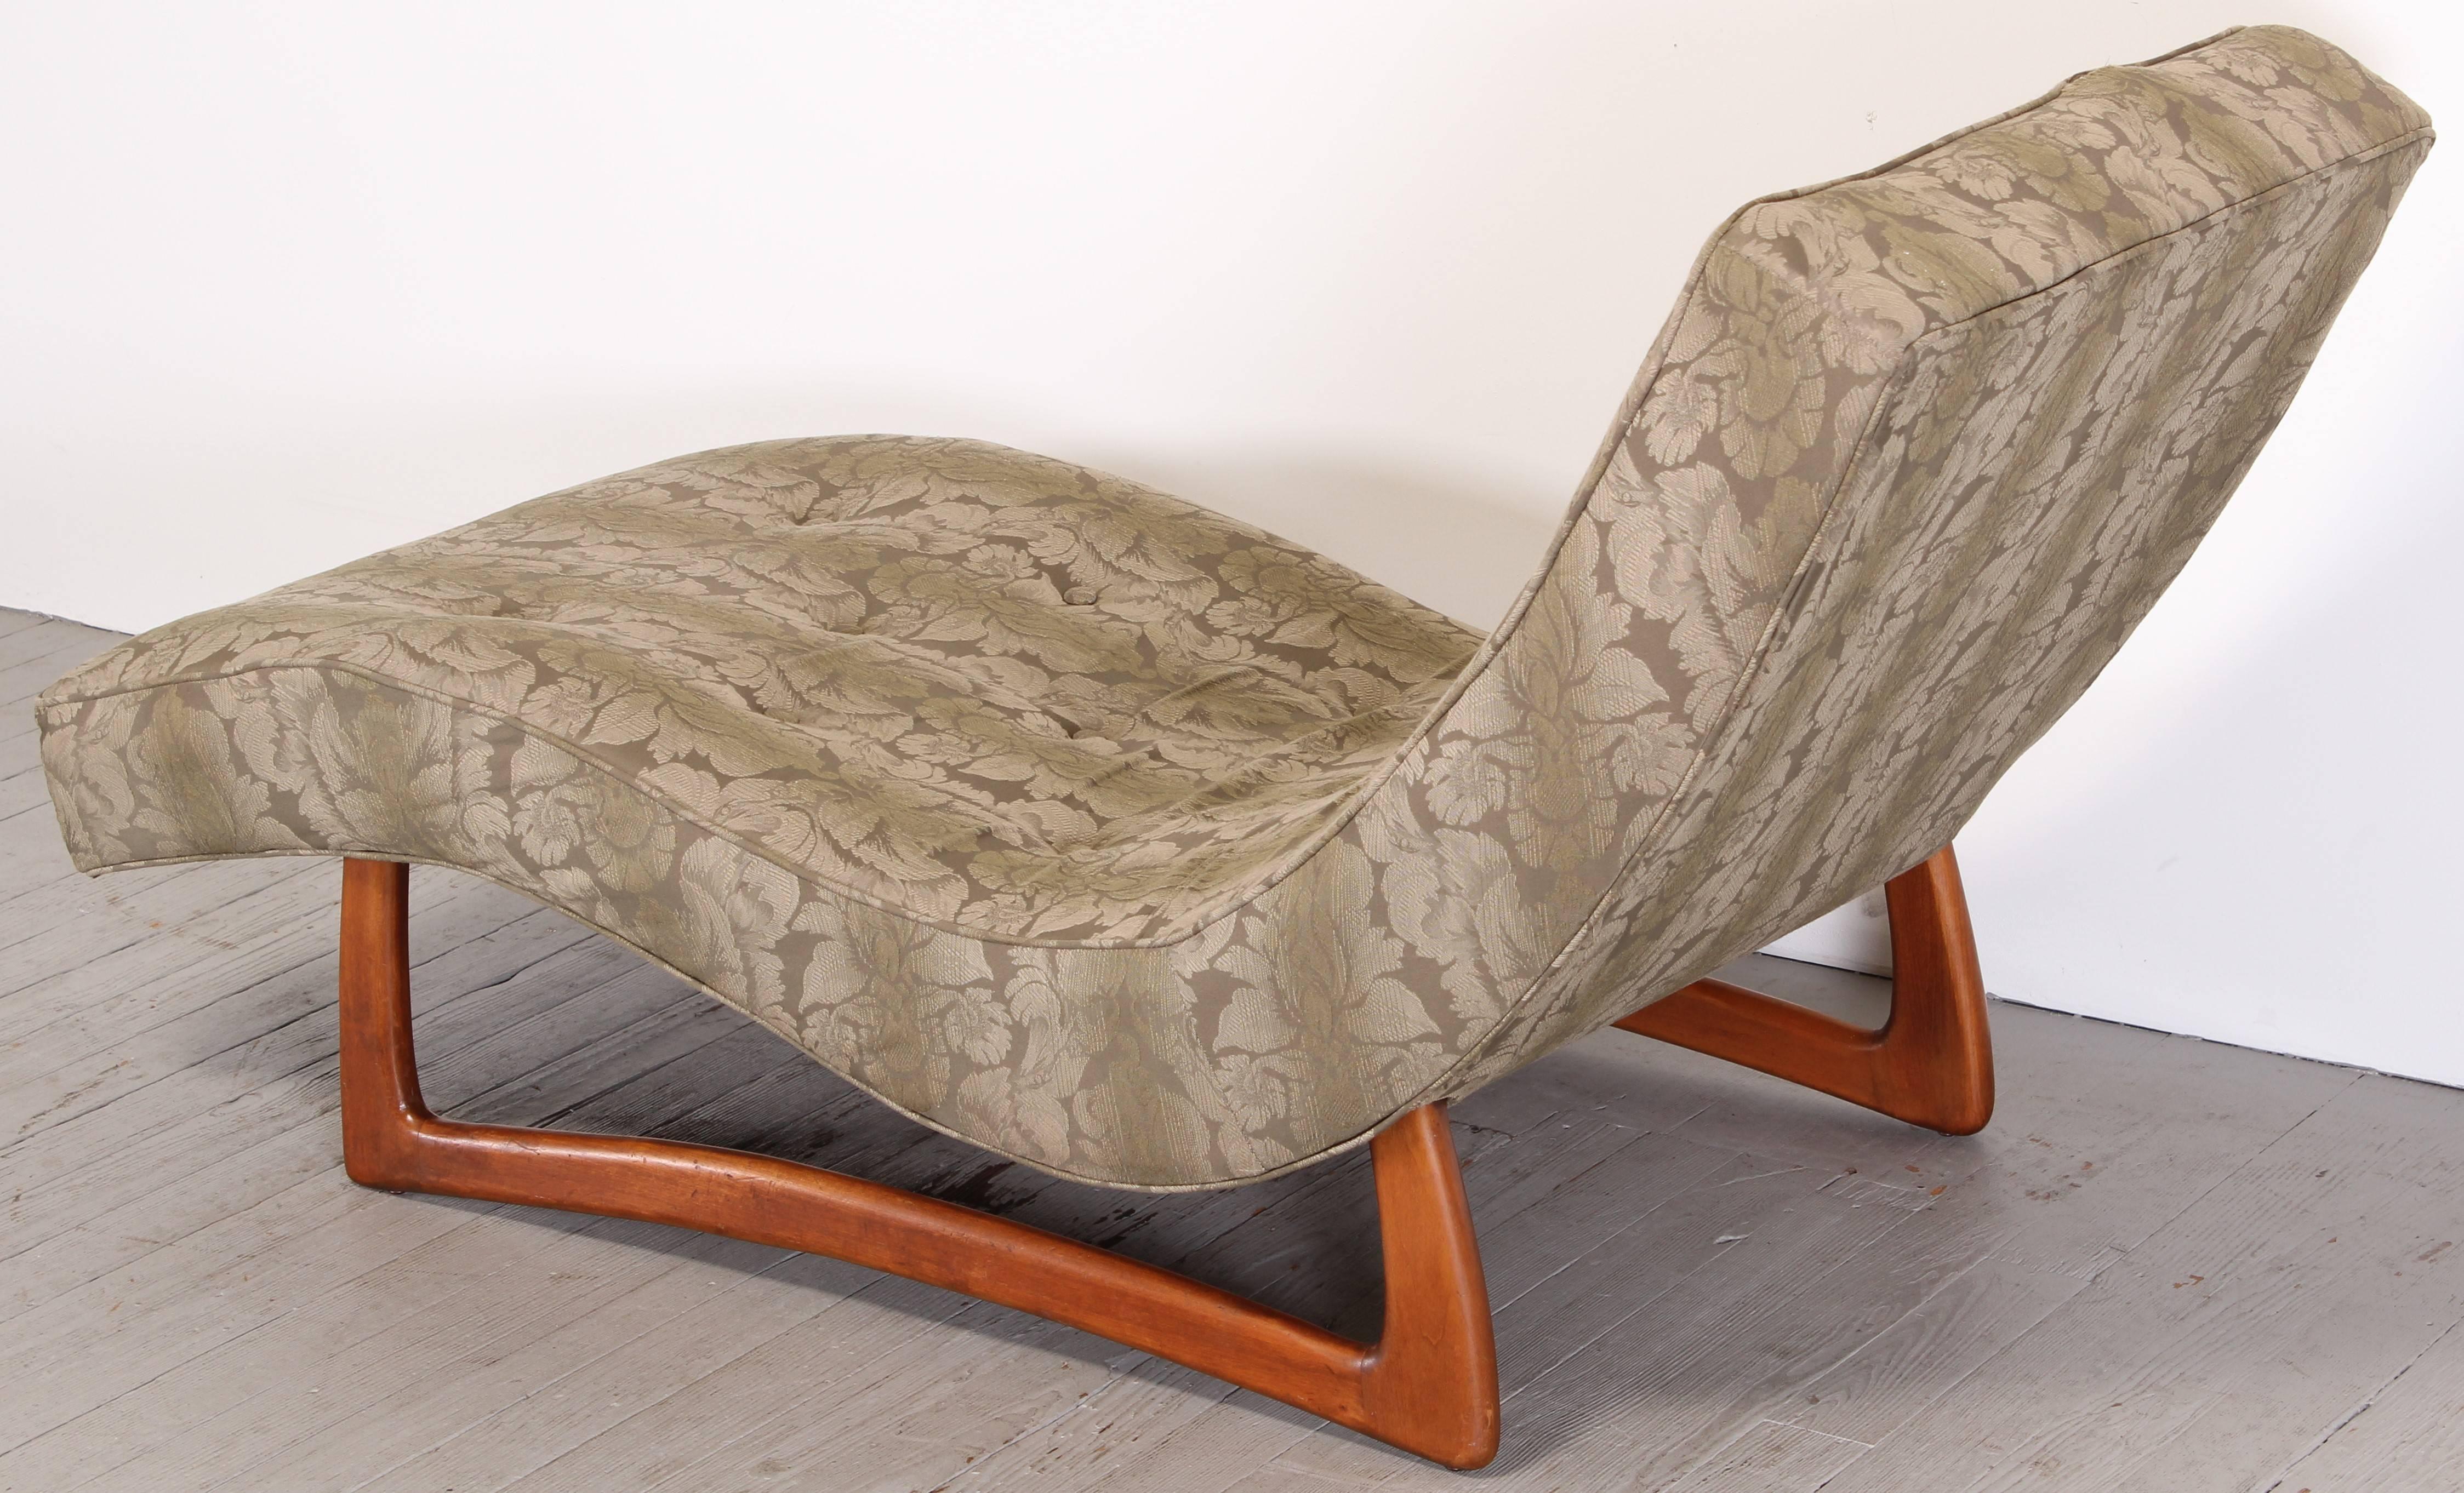 A Mid-Century Modern wave form chaise. Base probably walnut, upholstery is good except for about a 2 inch tear in fabric at the seam as show in images at the top of the chaise. Foam is soft no odors. 